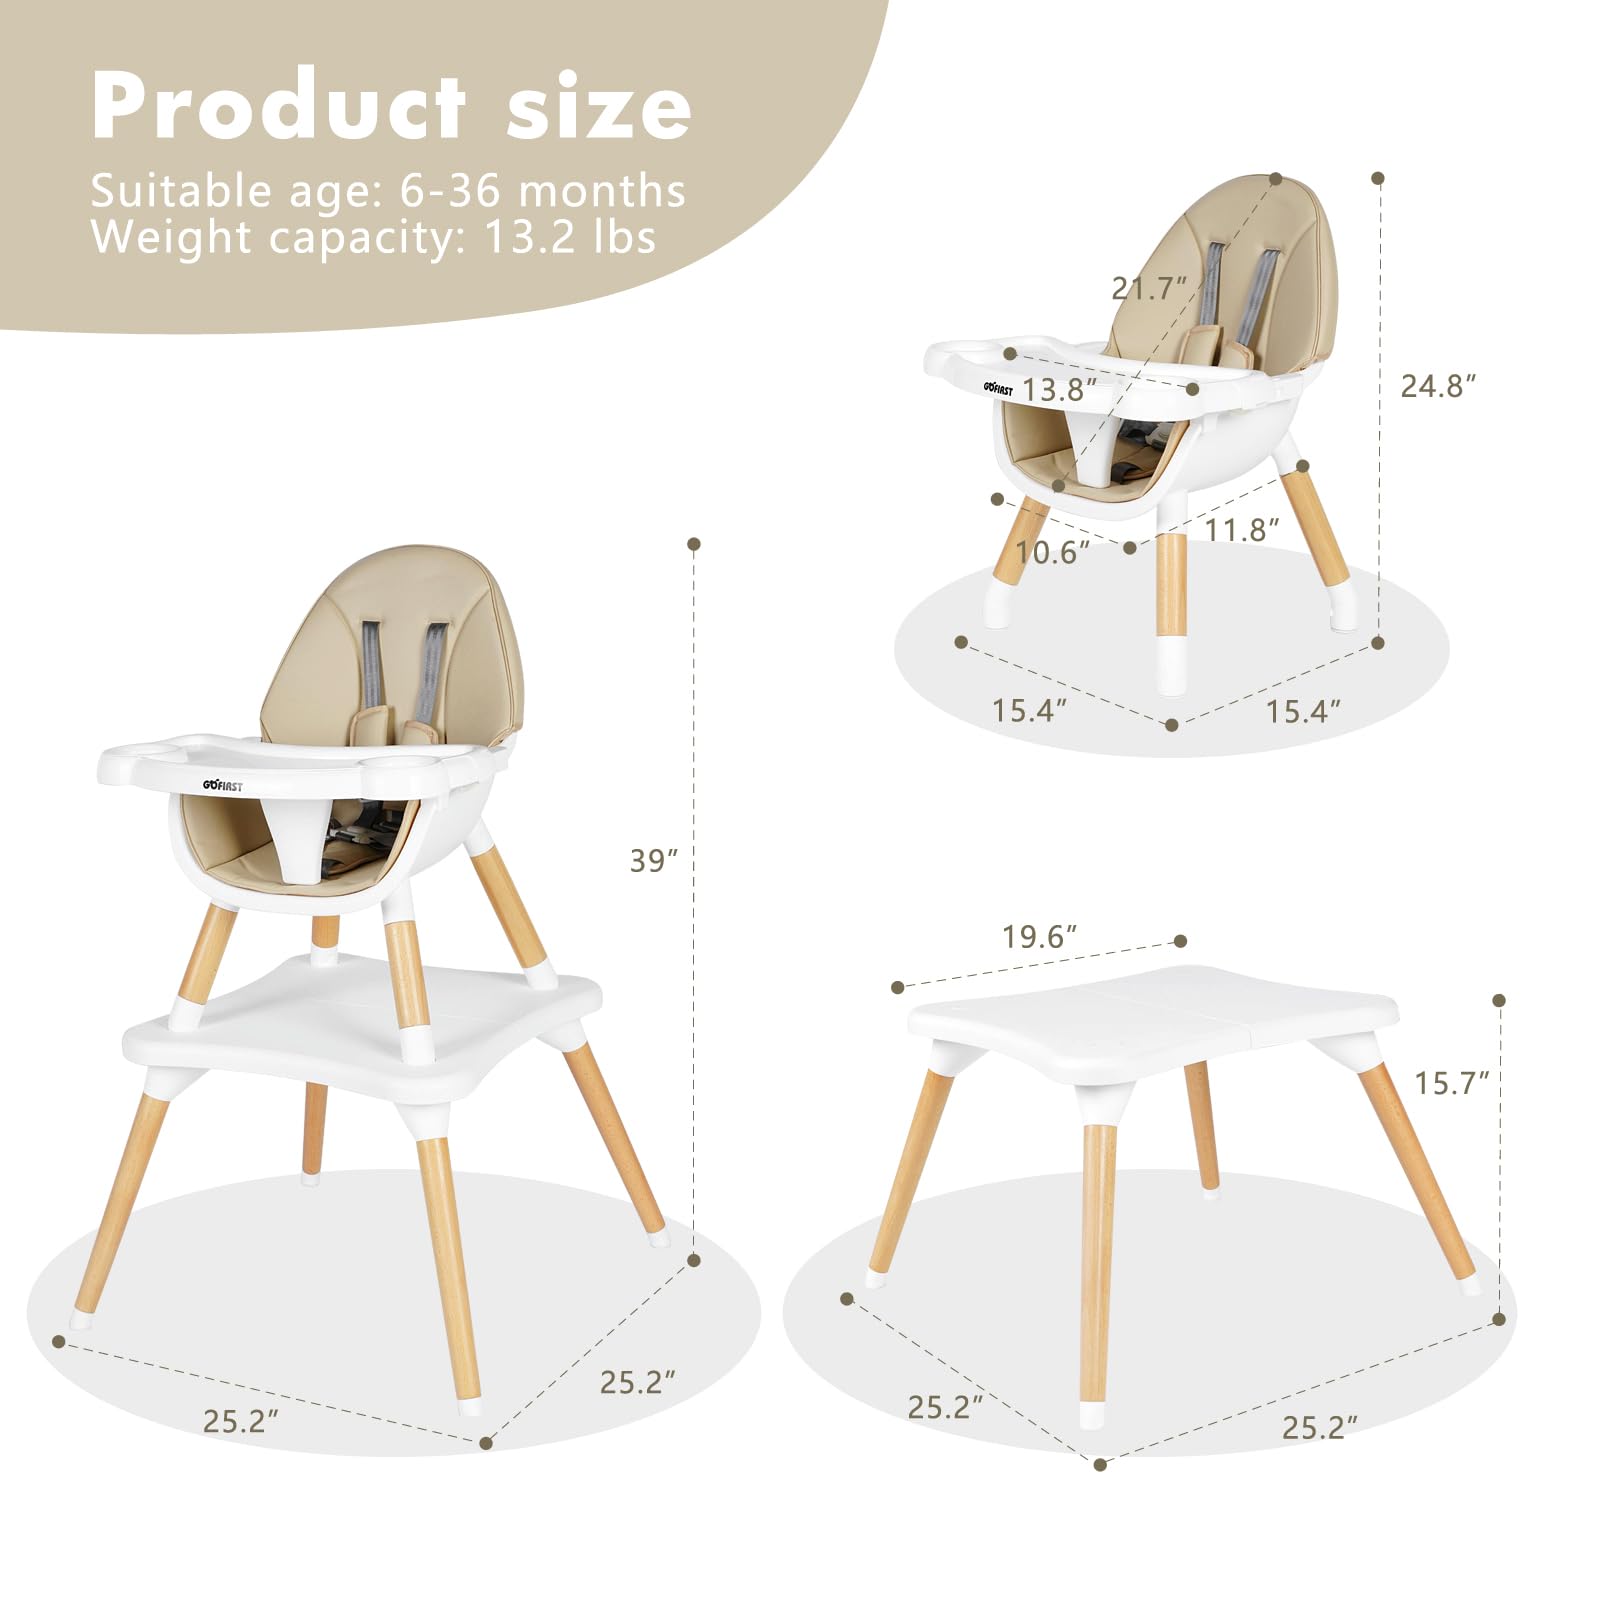 Gofirst 6 in 1 Baby High Chair,Convertible Wooden High Chairs for Babies and Toddlers,Infant Dining Booster Seat,Building Block Table/Baby Highchair 4-Position Removable Baby Feeding Chair